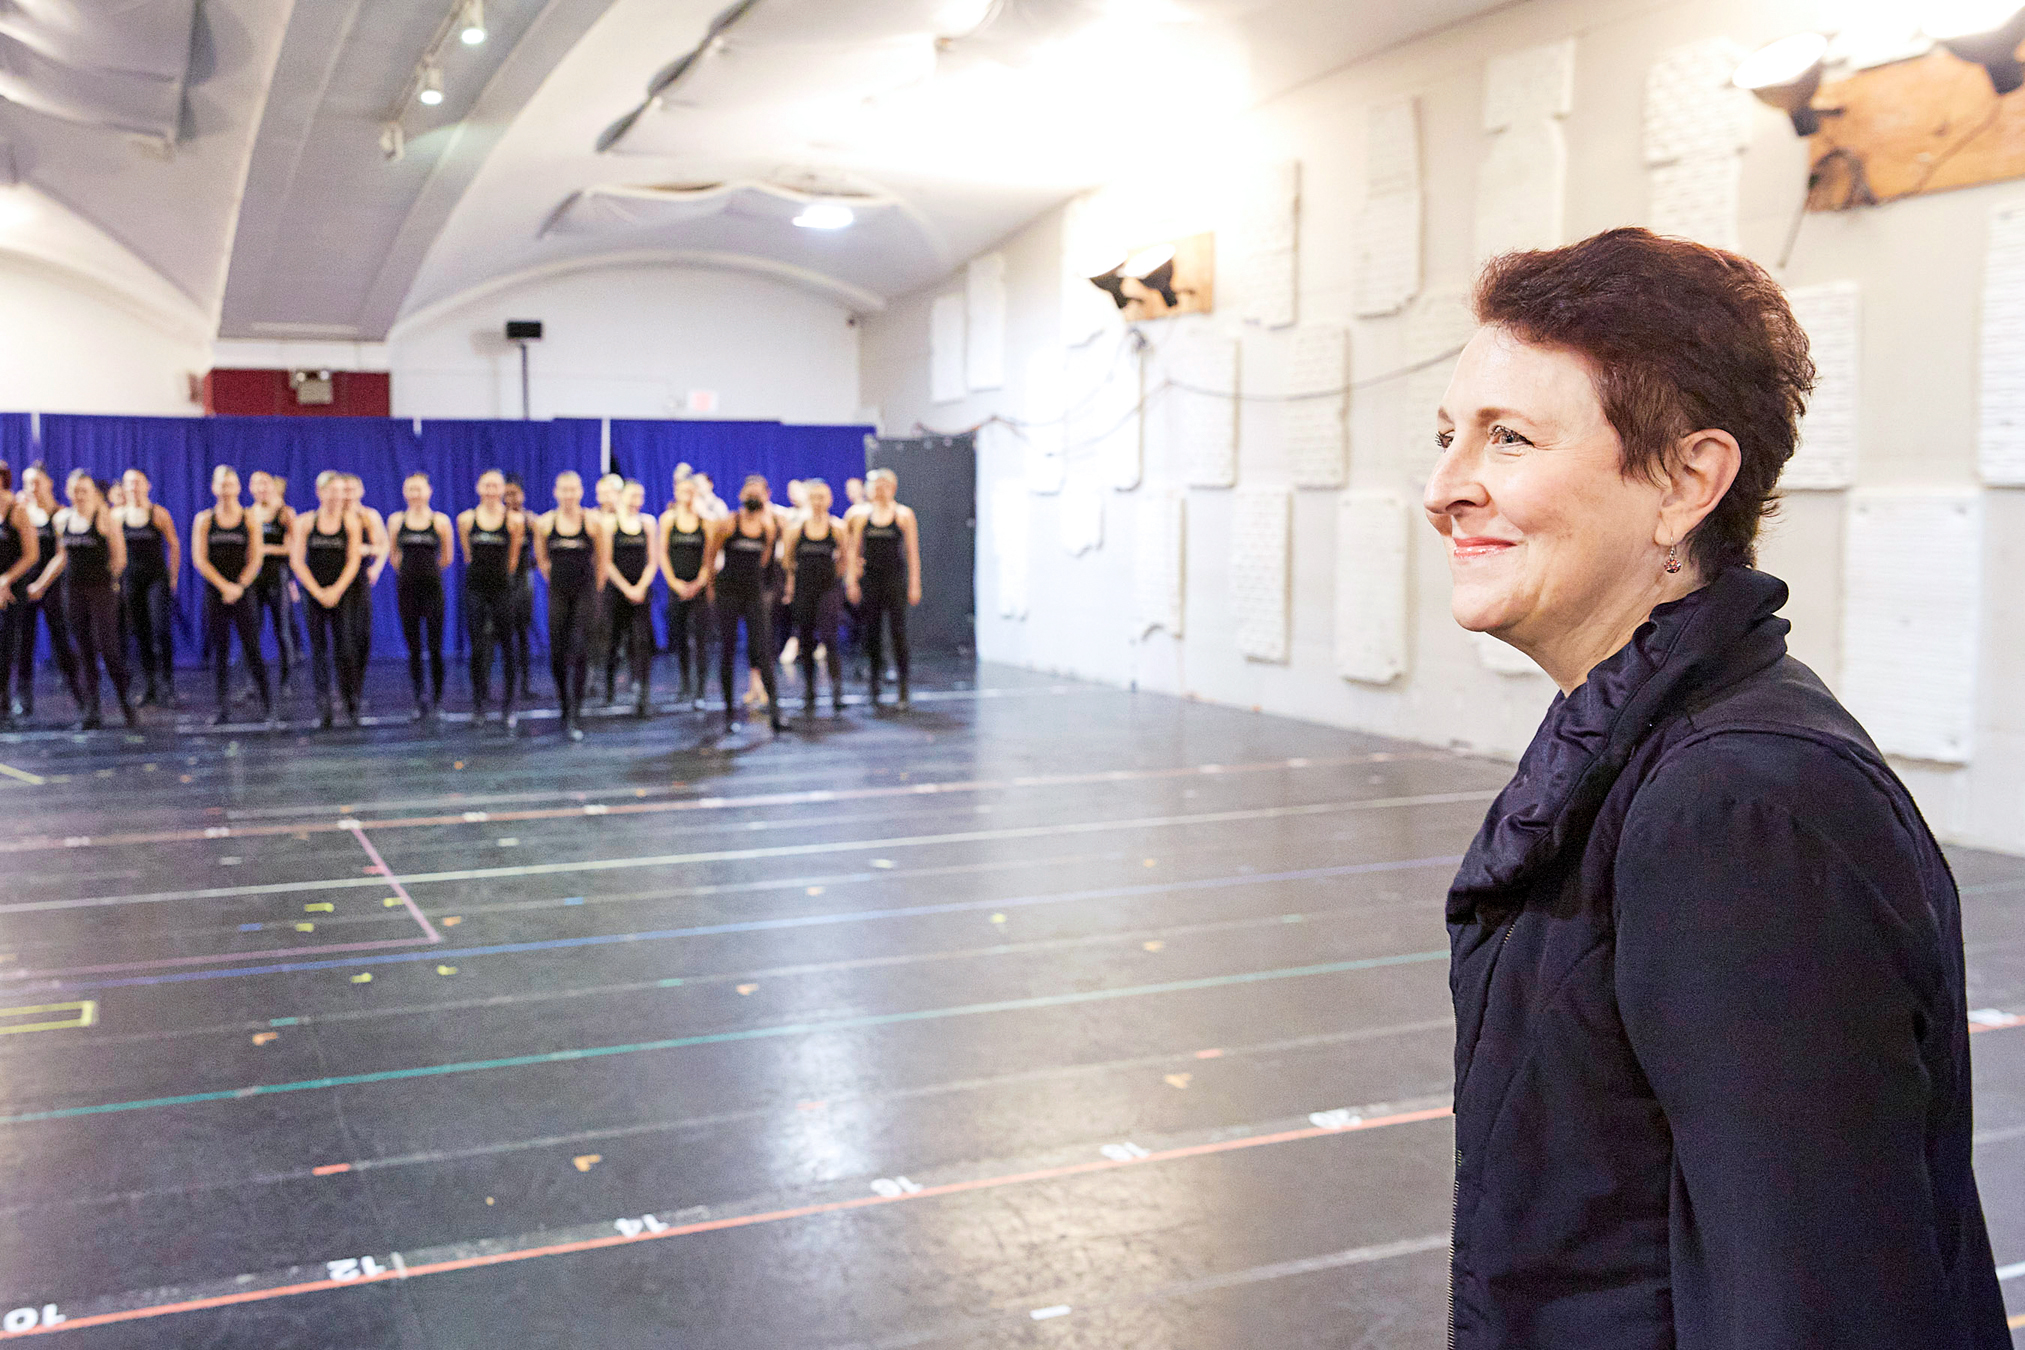 Julie Branam is seen in the foreground, standing in profile with a closed-lip smile. Across the studio, over a dozen women in matching black rehearsal-wear stand to one side.